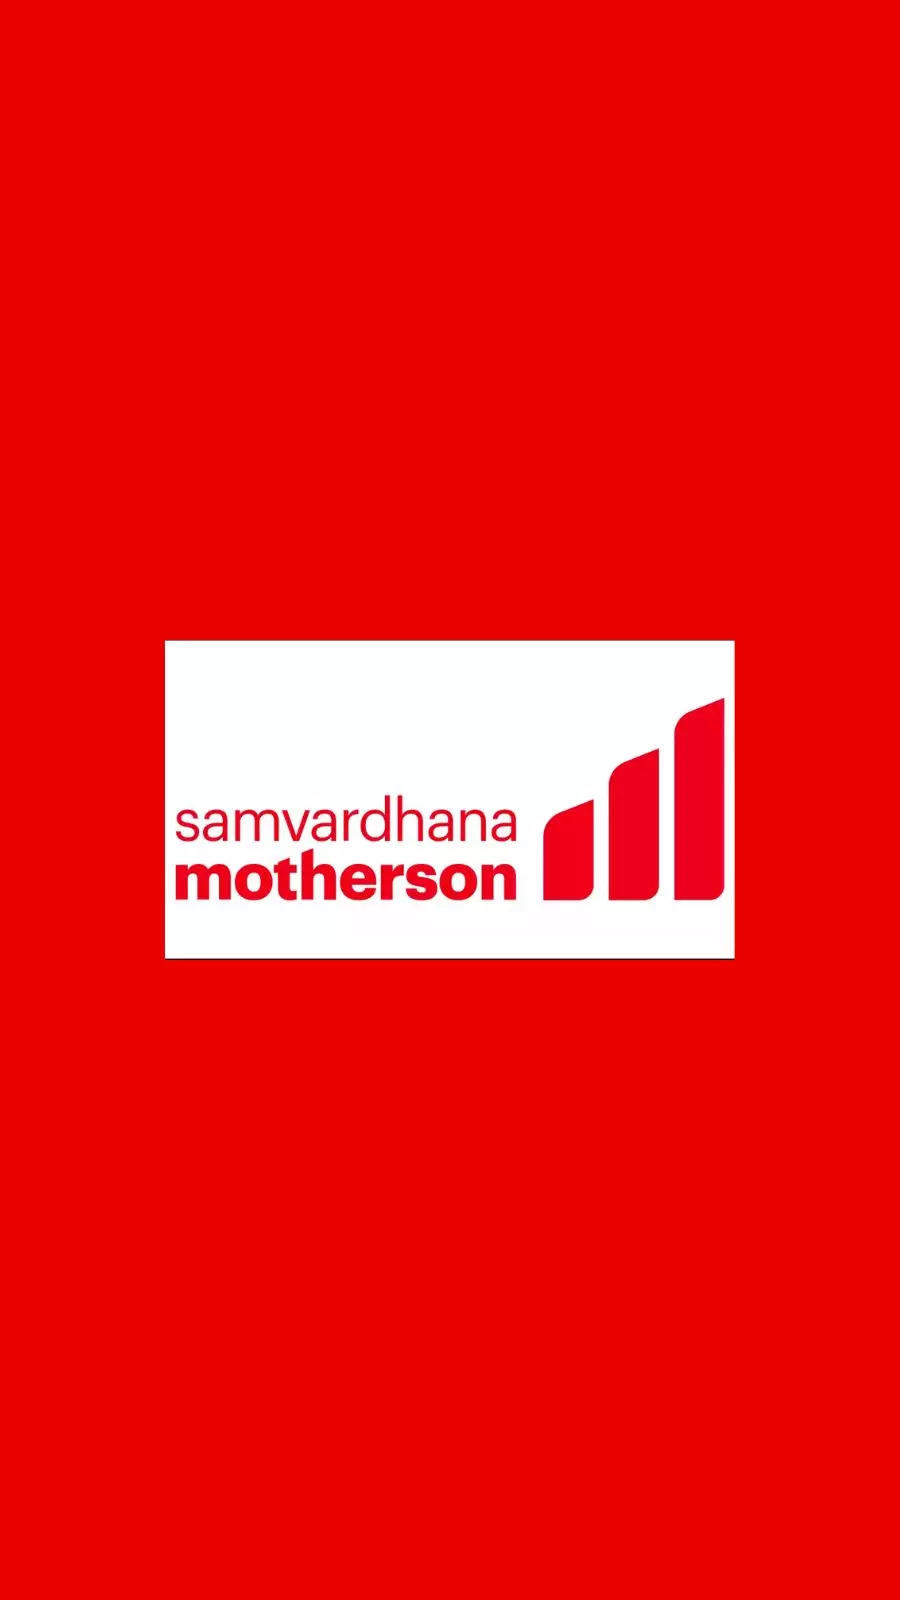 Global recovery underway, Samvardhana Motherson can rally up to 35%, says  Motilal Oswal - The Economic Times